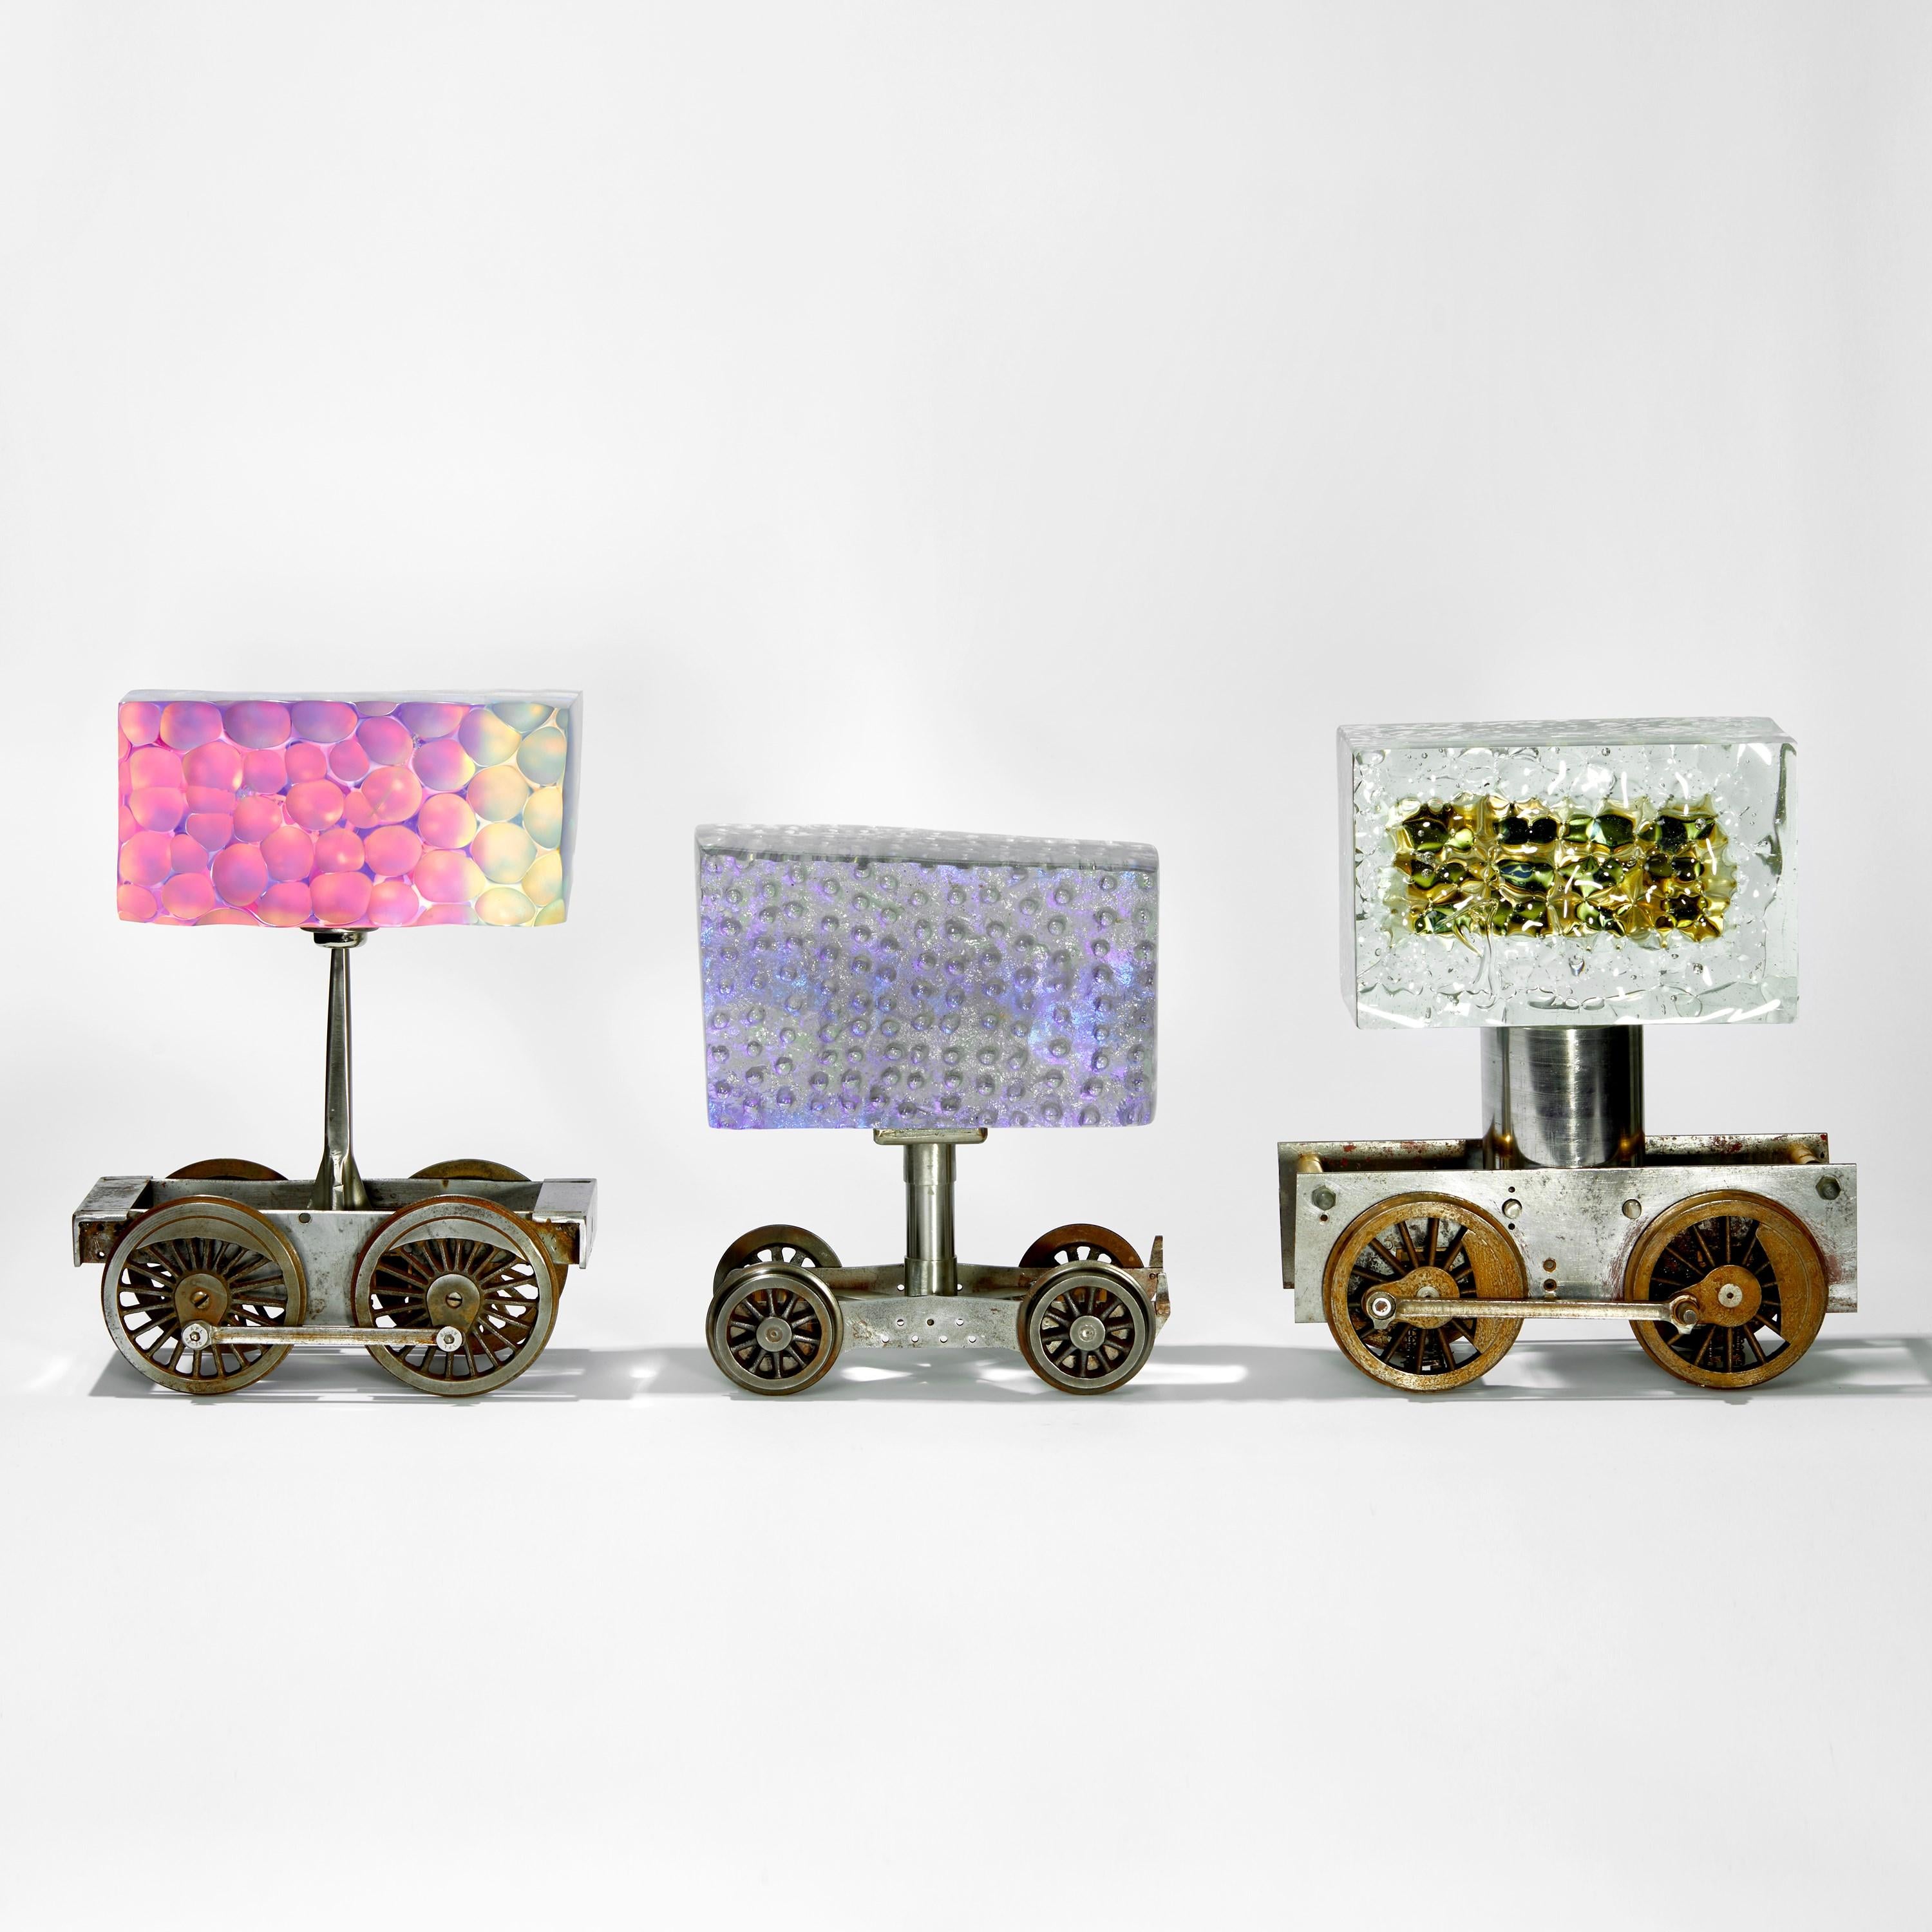  Phateon, a steel & glass train / locomotive inspired sculpture by Jon Lewis For Sale 1